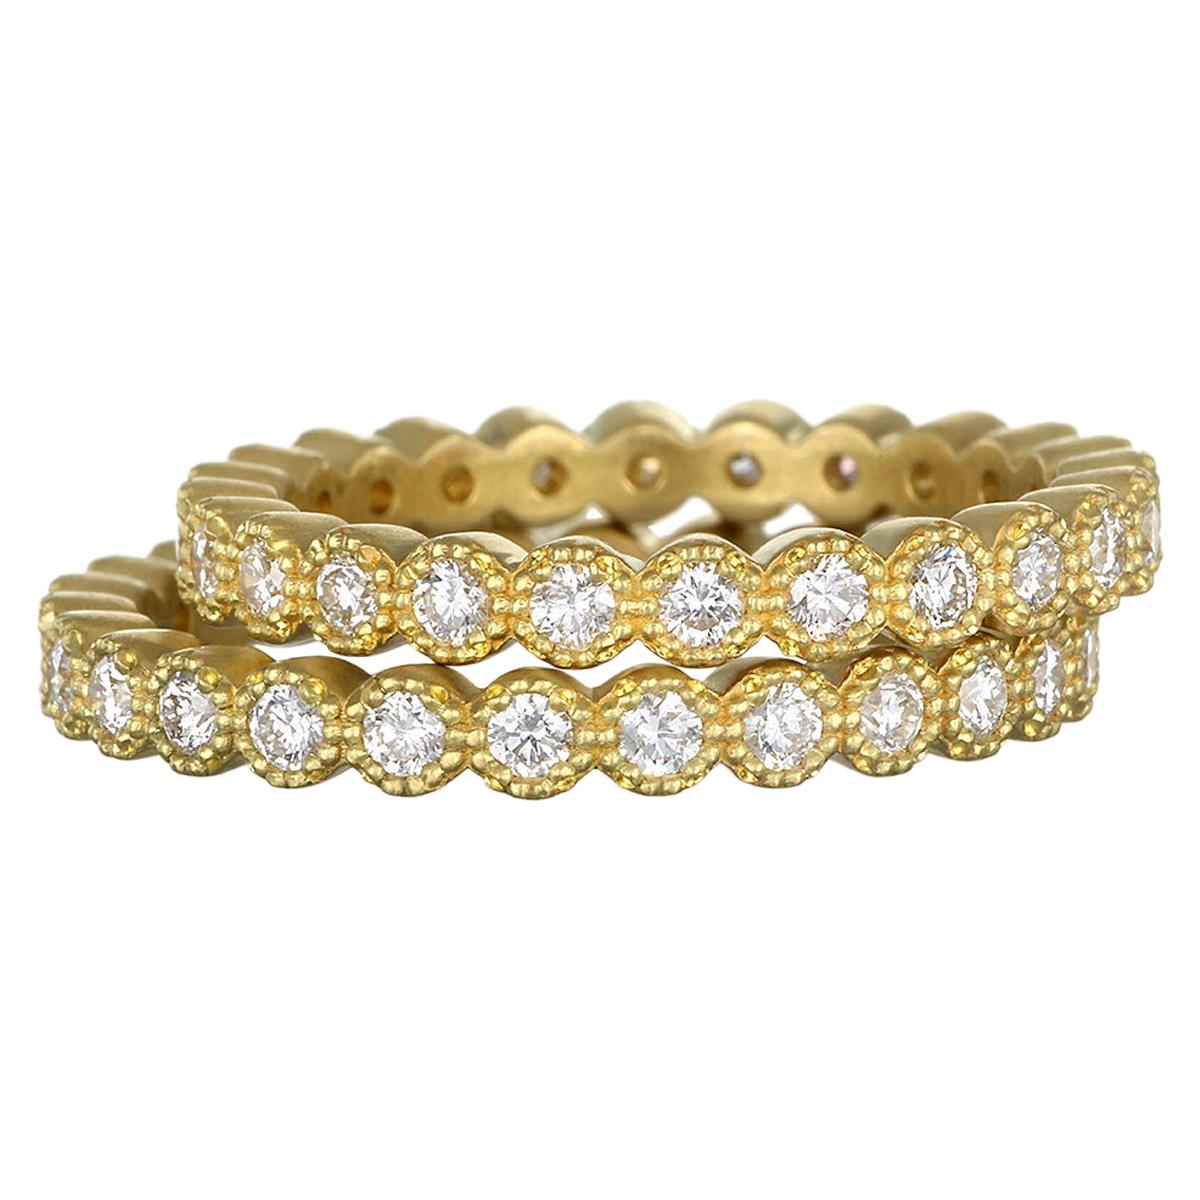 Worn alone or stacked, Faye Kim's 18K Gold Milgrain Diamond Eternity Bands are a great addition to your jewelry collection. 
Classic eternity band with a Milgrain edge detail, the bright white diamonds are lively and sparkle like only diamonds